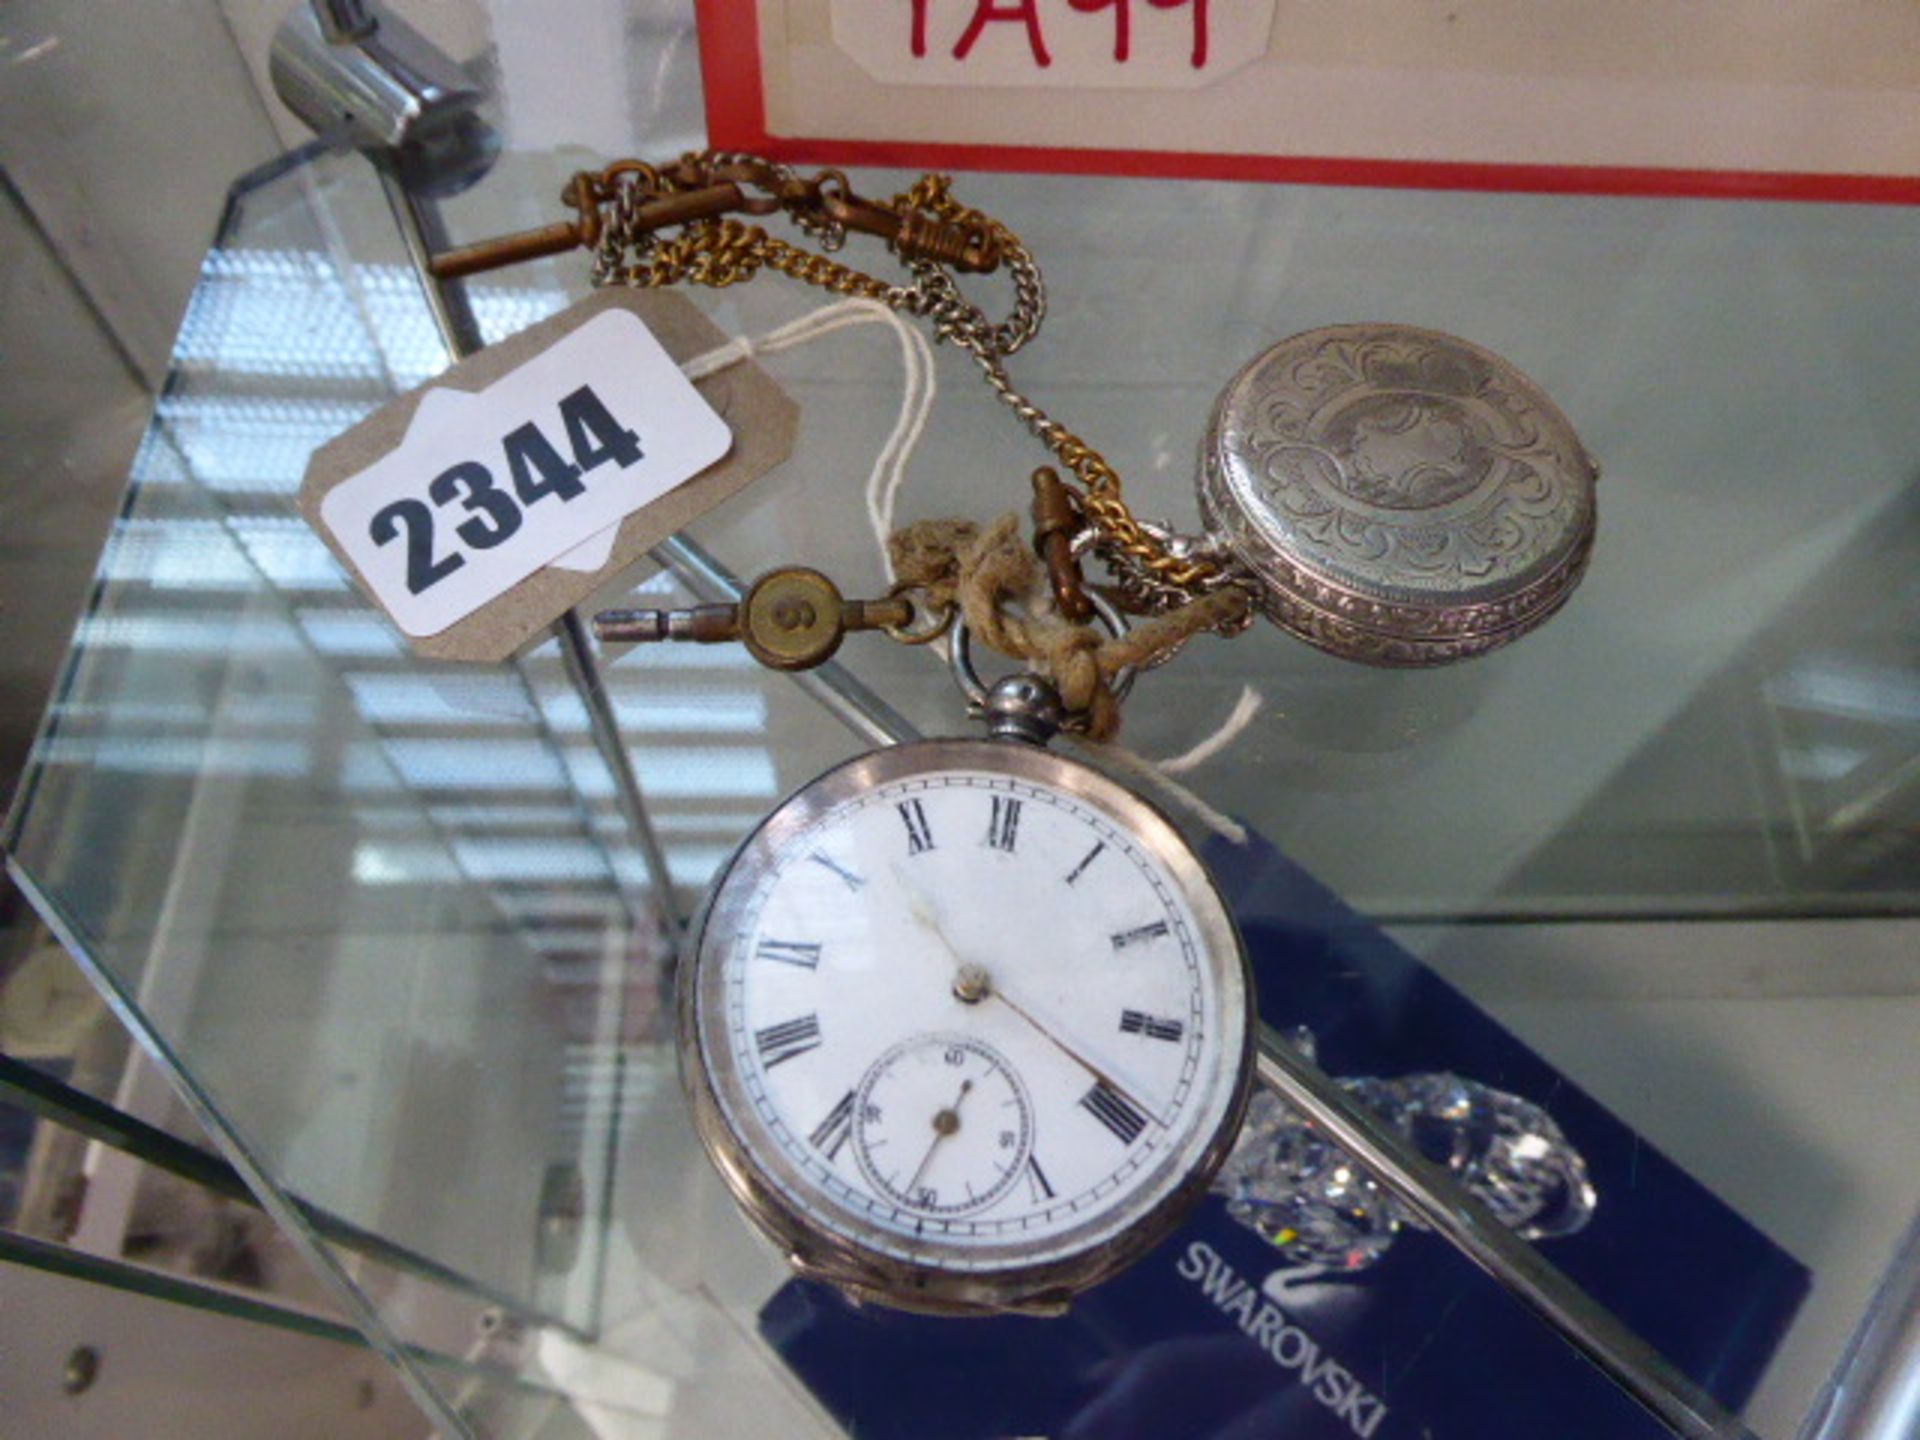 2 pocket watches with keys